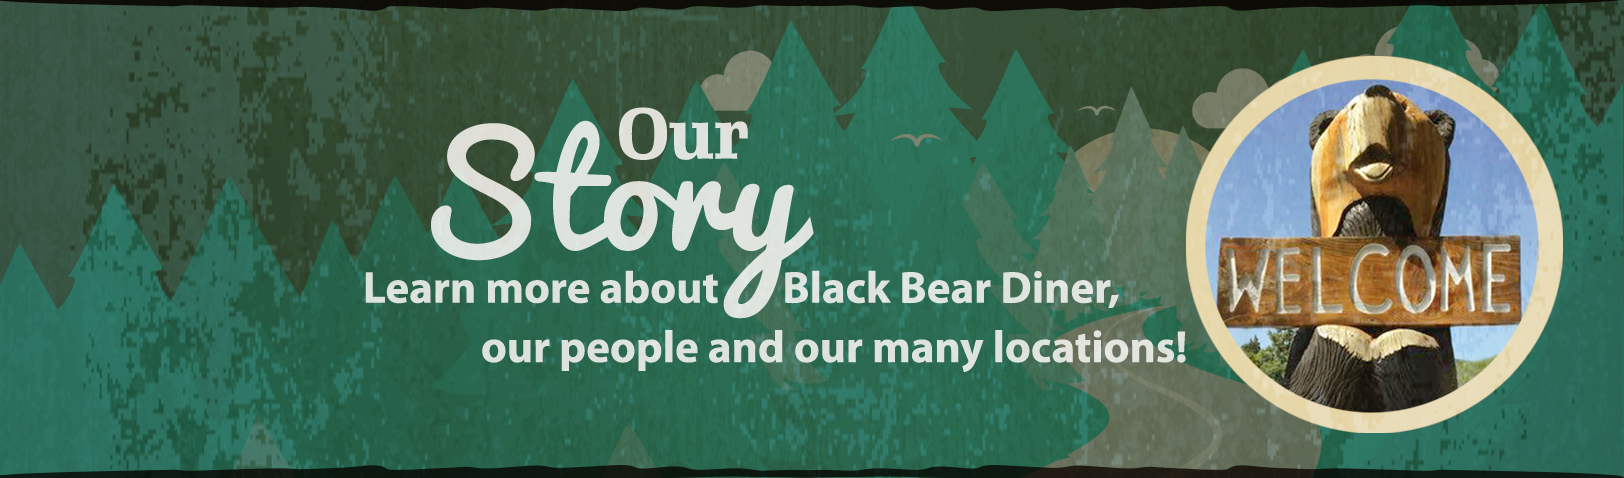 Our Story: Learn more about Black Bear Diner, our people, and our many locations!